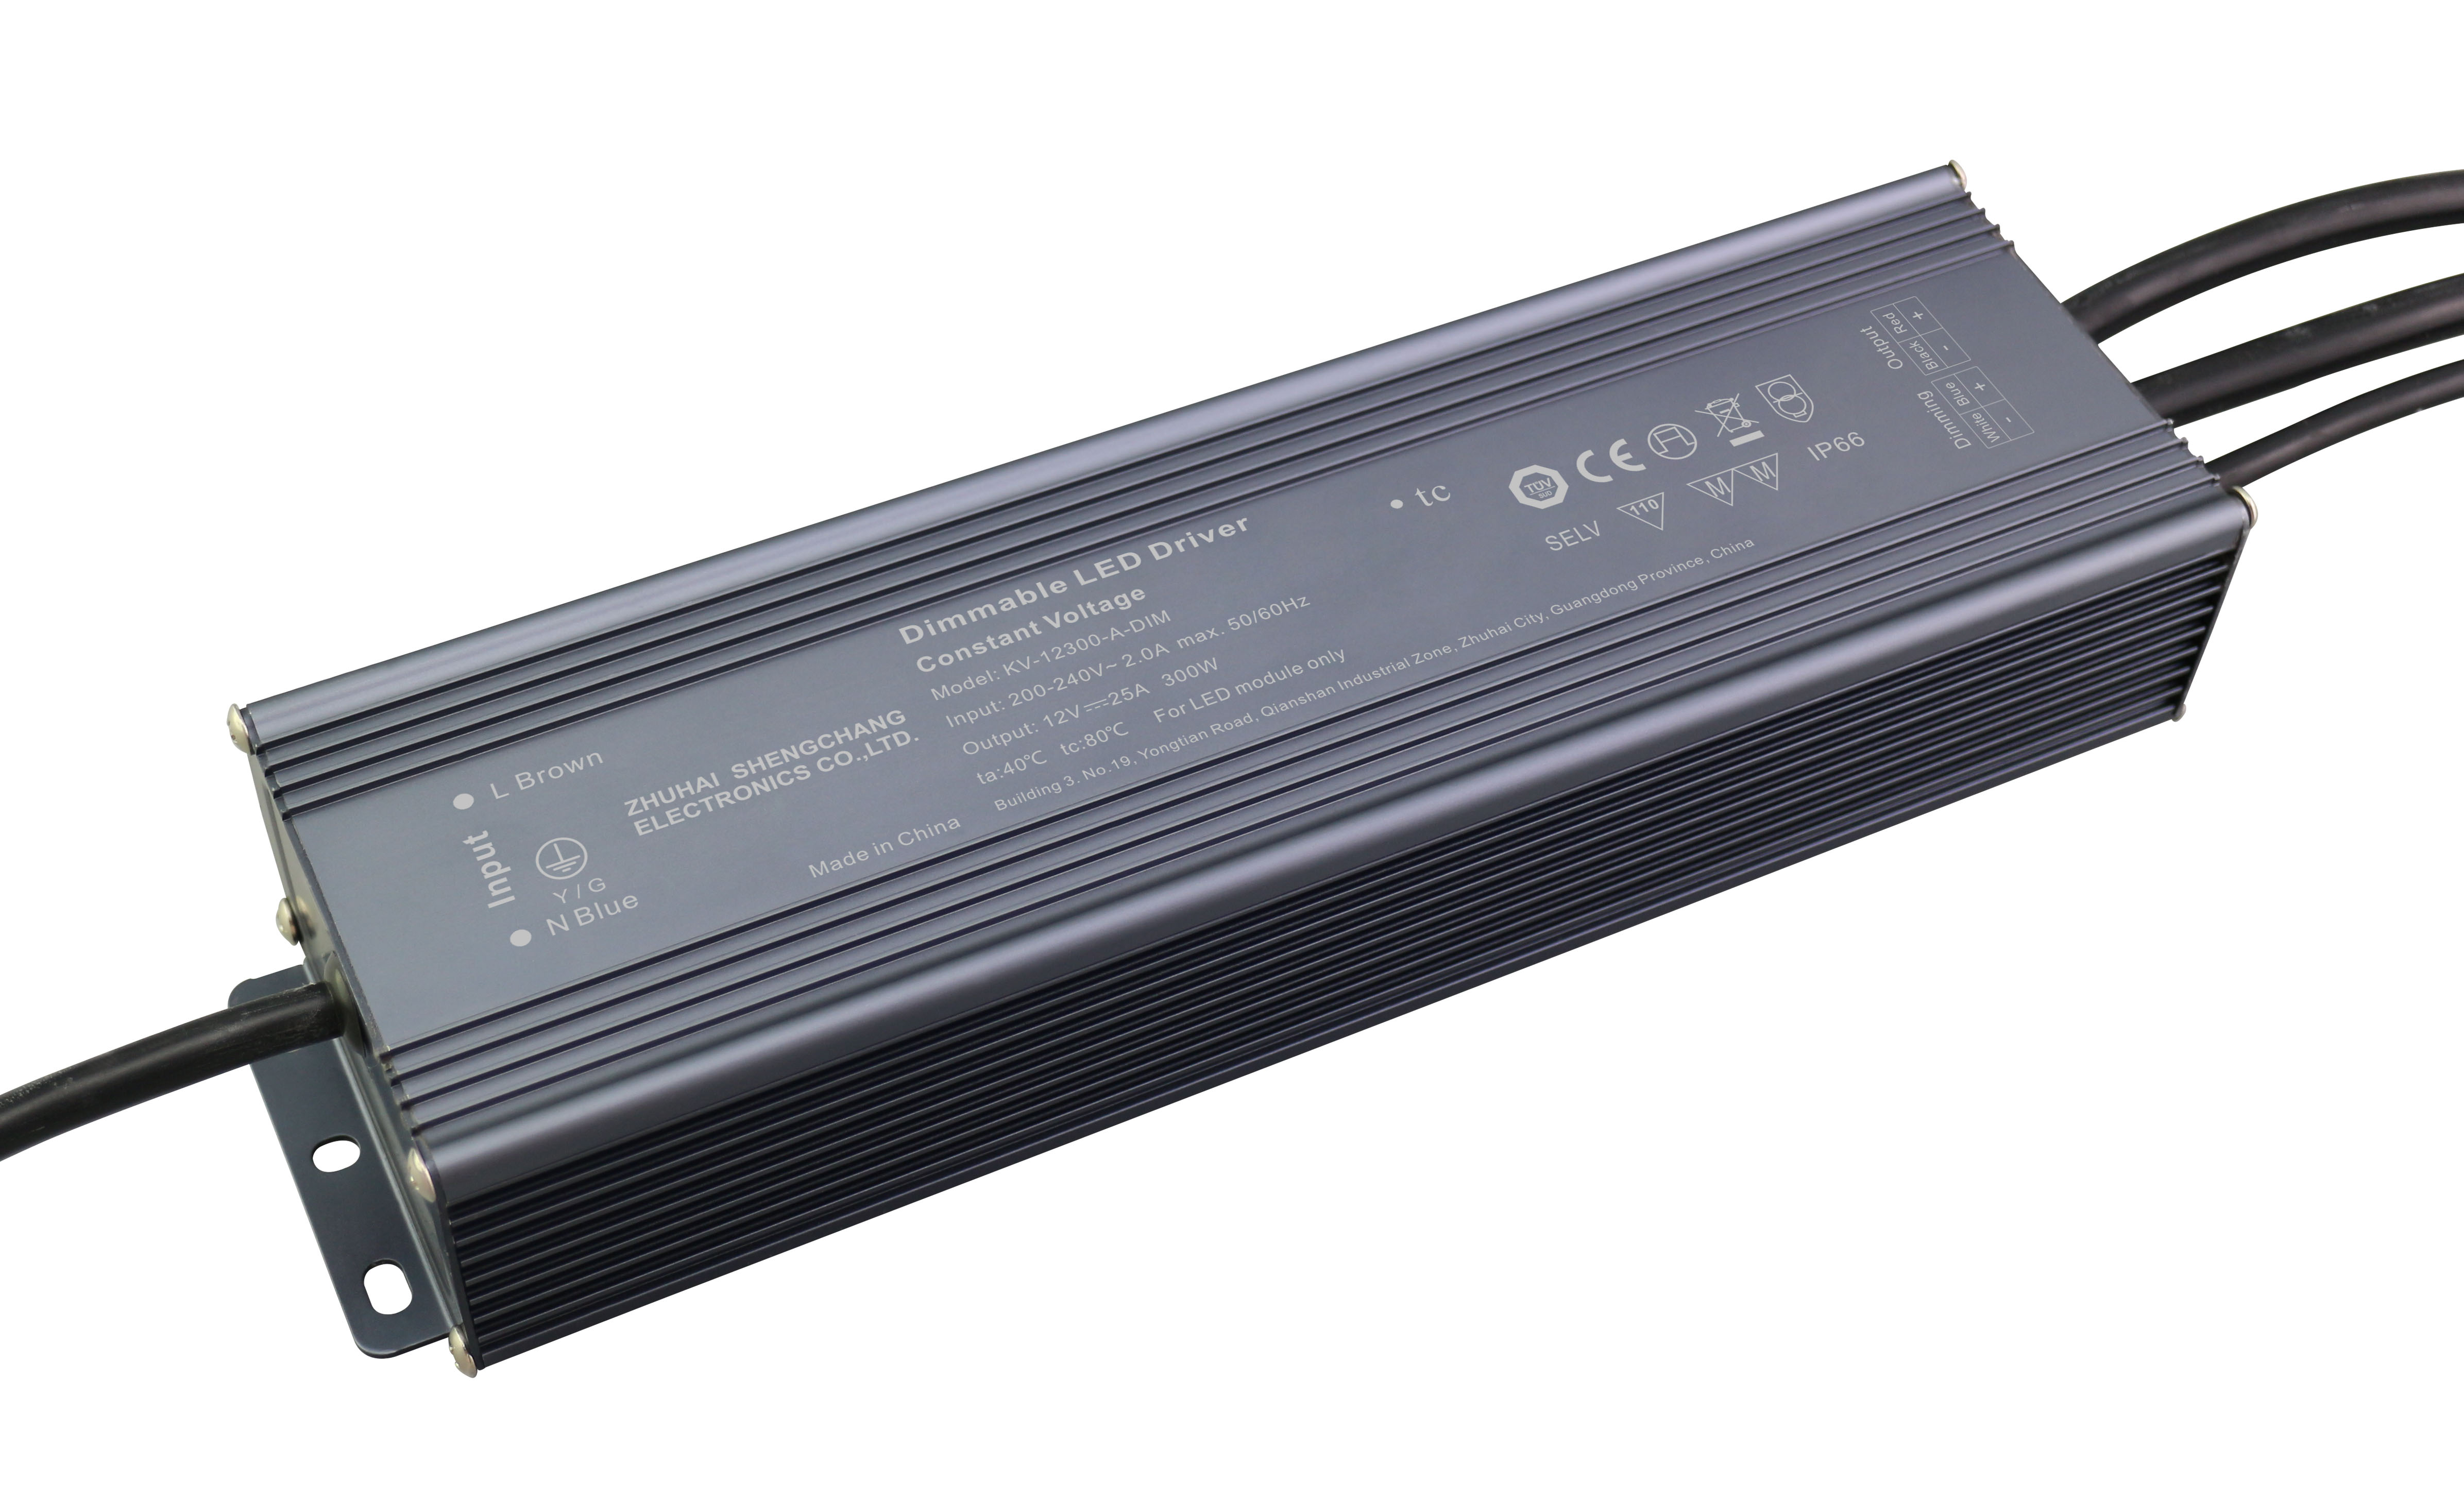 KV-A-DIM Series 300W 0/1-10V constant voltage dimmable LED driver